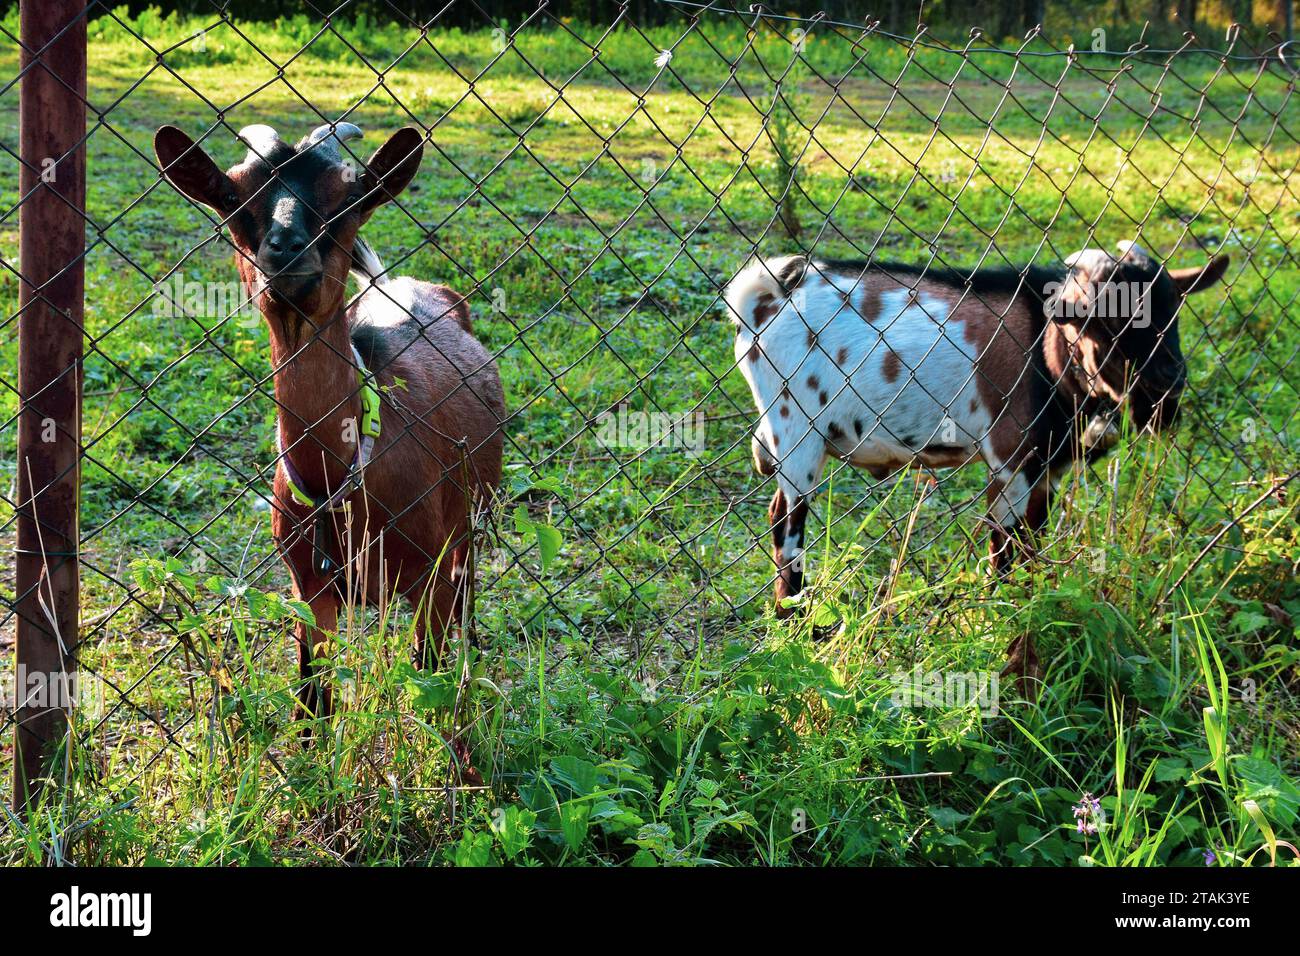 Two goats are standing next to a wire fence. Tame, domestic animals stay peacefully on the fenced property. Stock Photo